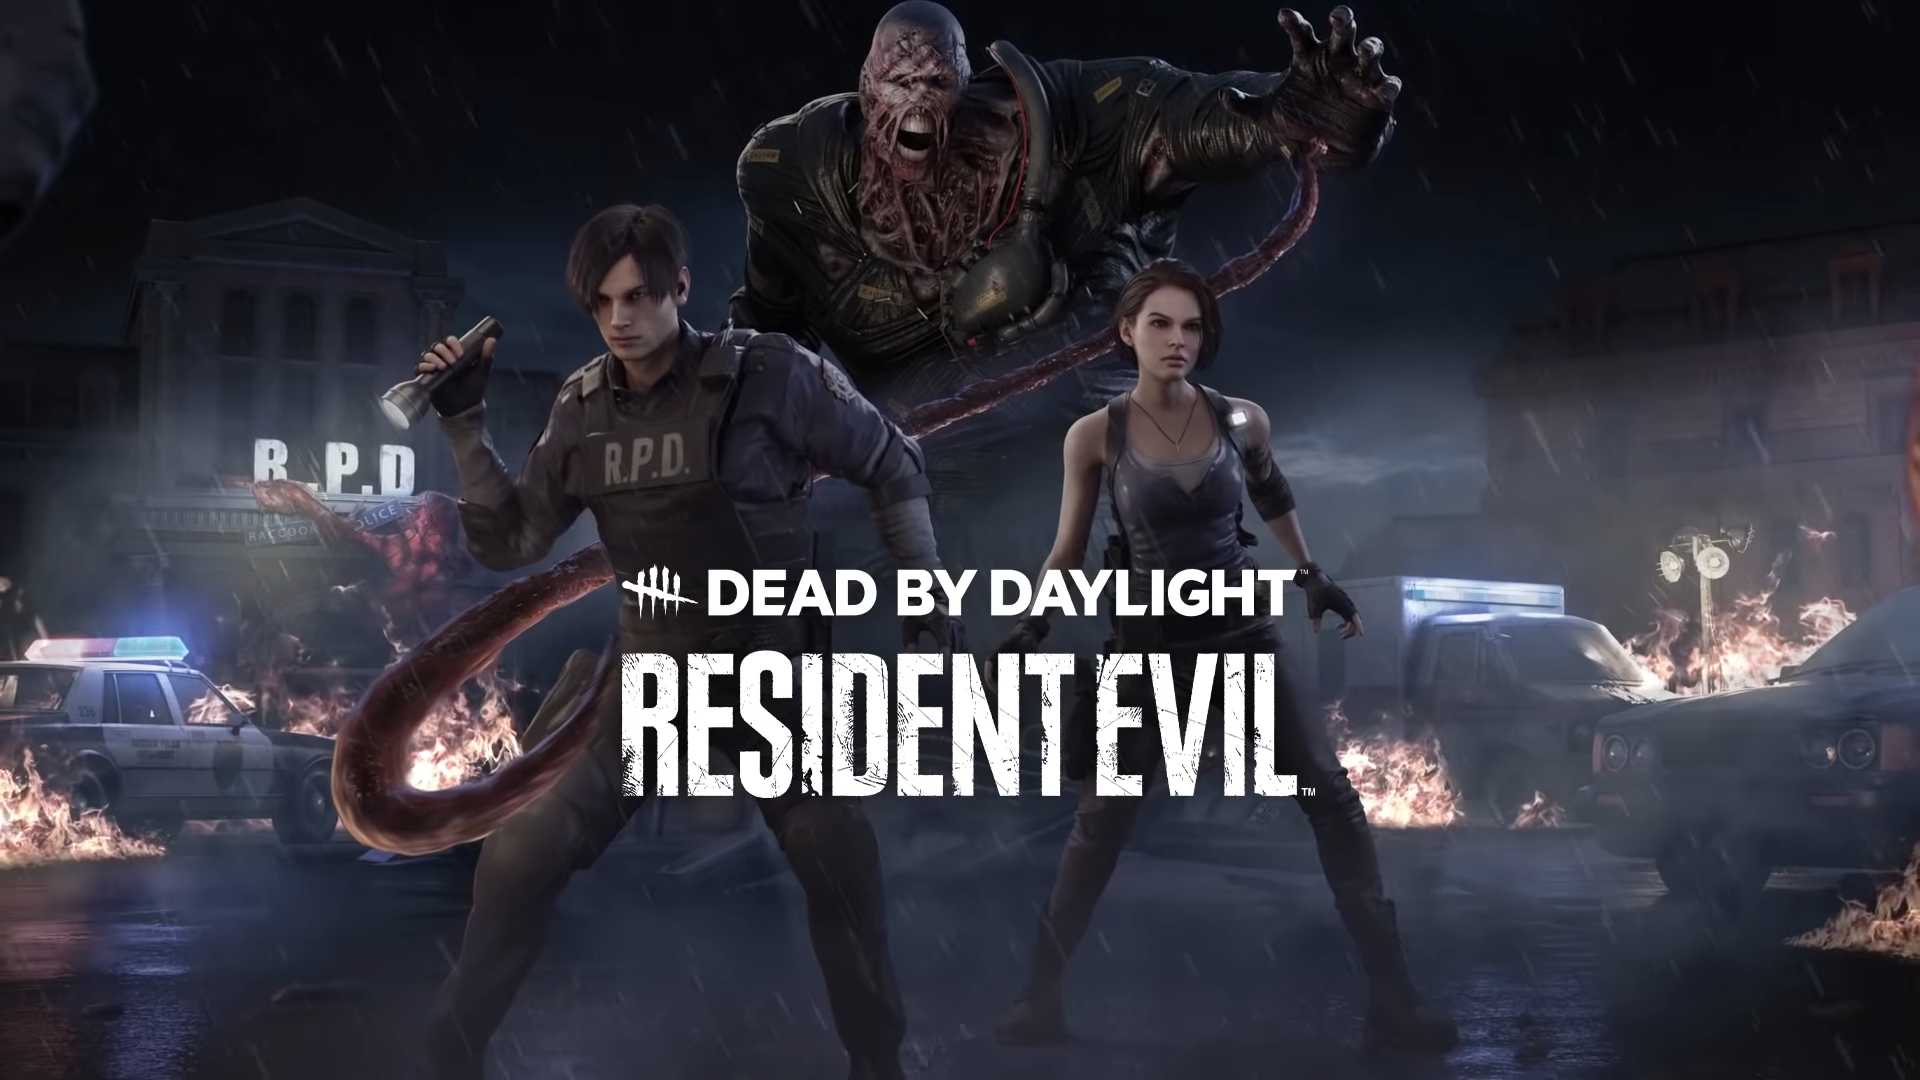 Dead by Daylight and Resident Evil Join Forces in a Terrifying New Collaboration!